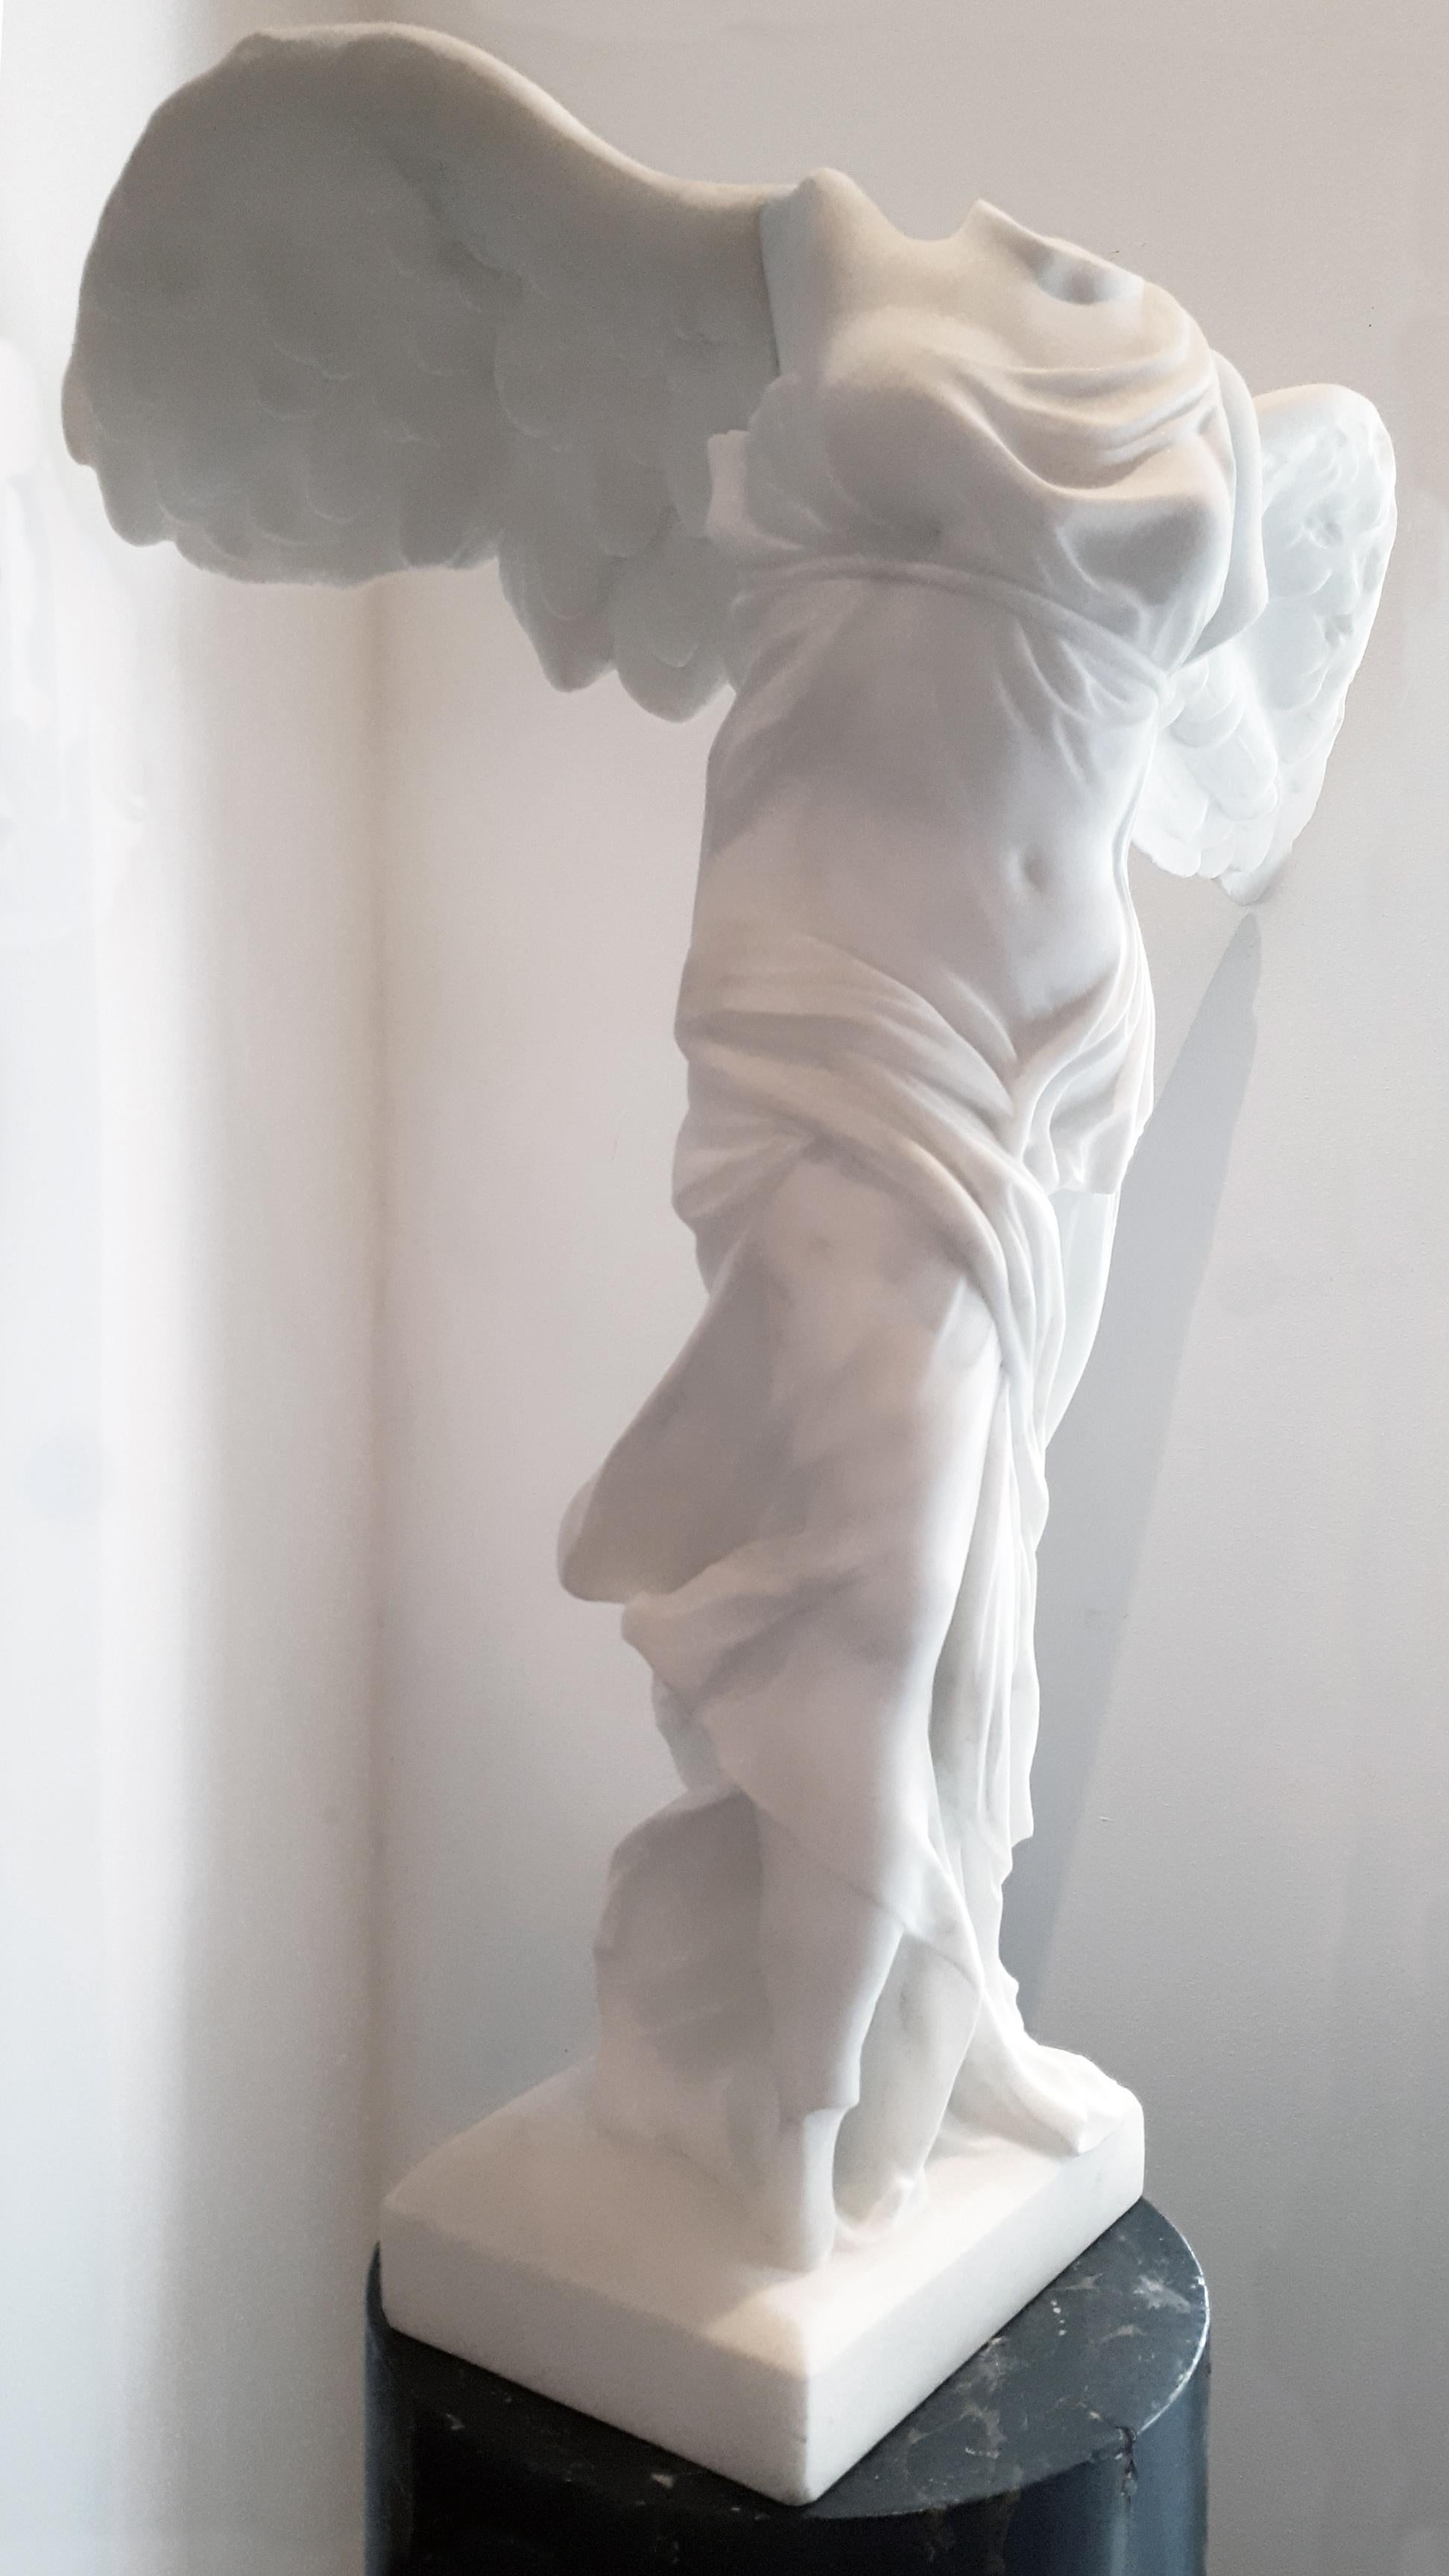 A late 19th century statue of the Winged Victory of Samothrace. This beautiful antique piece is made of a Carrara marble of statuary quality and is a copy of the Hellenistic sculpture of Nike (the Greek goddess of victory), that was created in circa